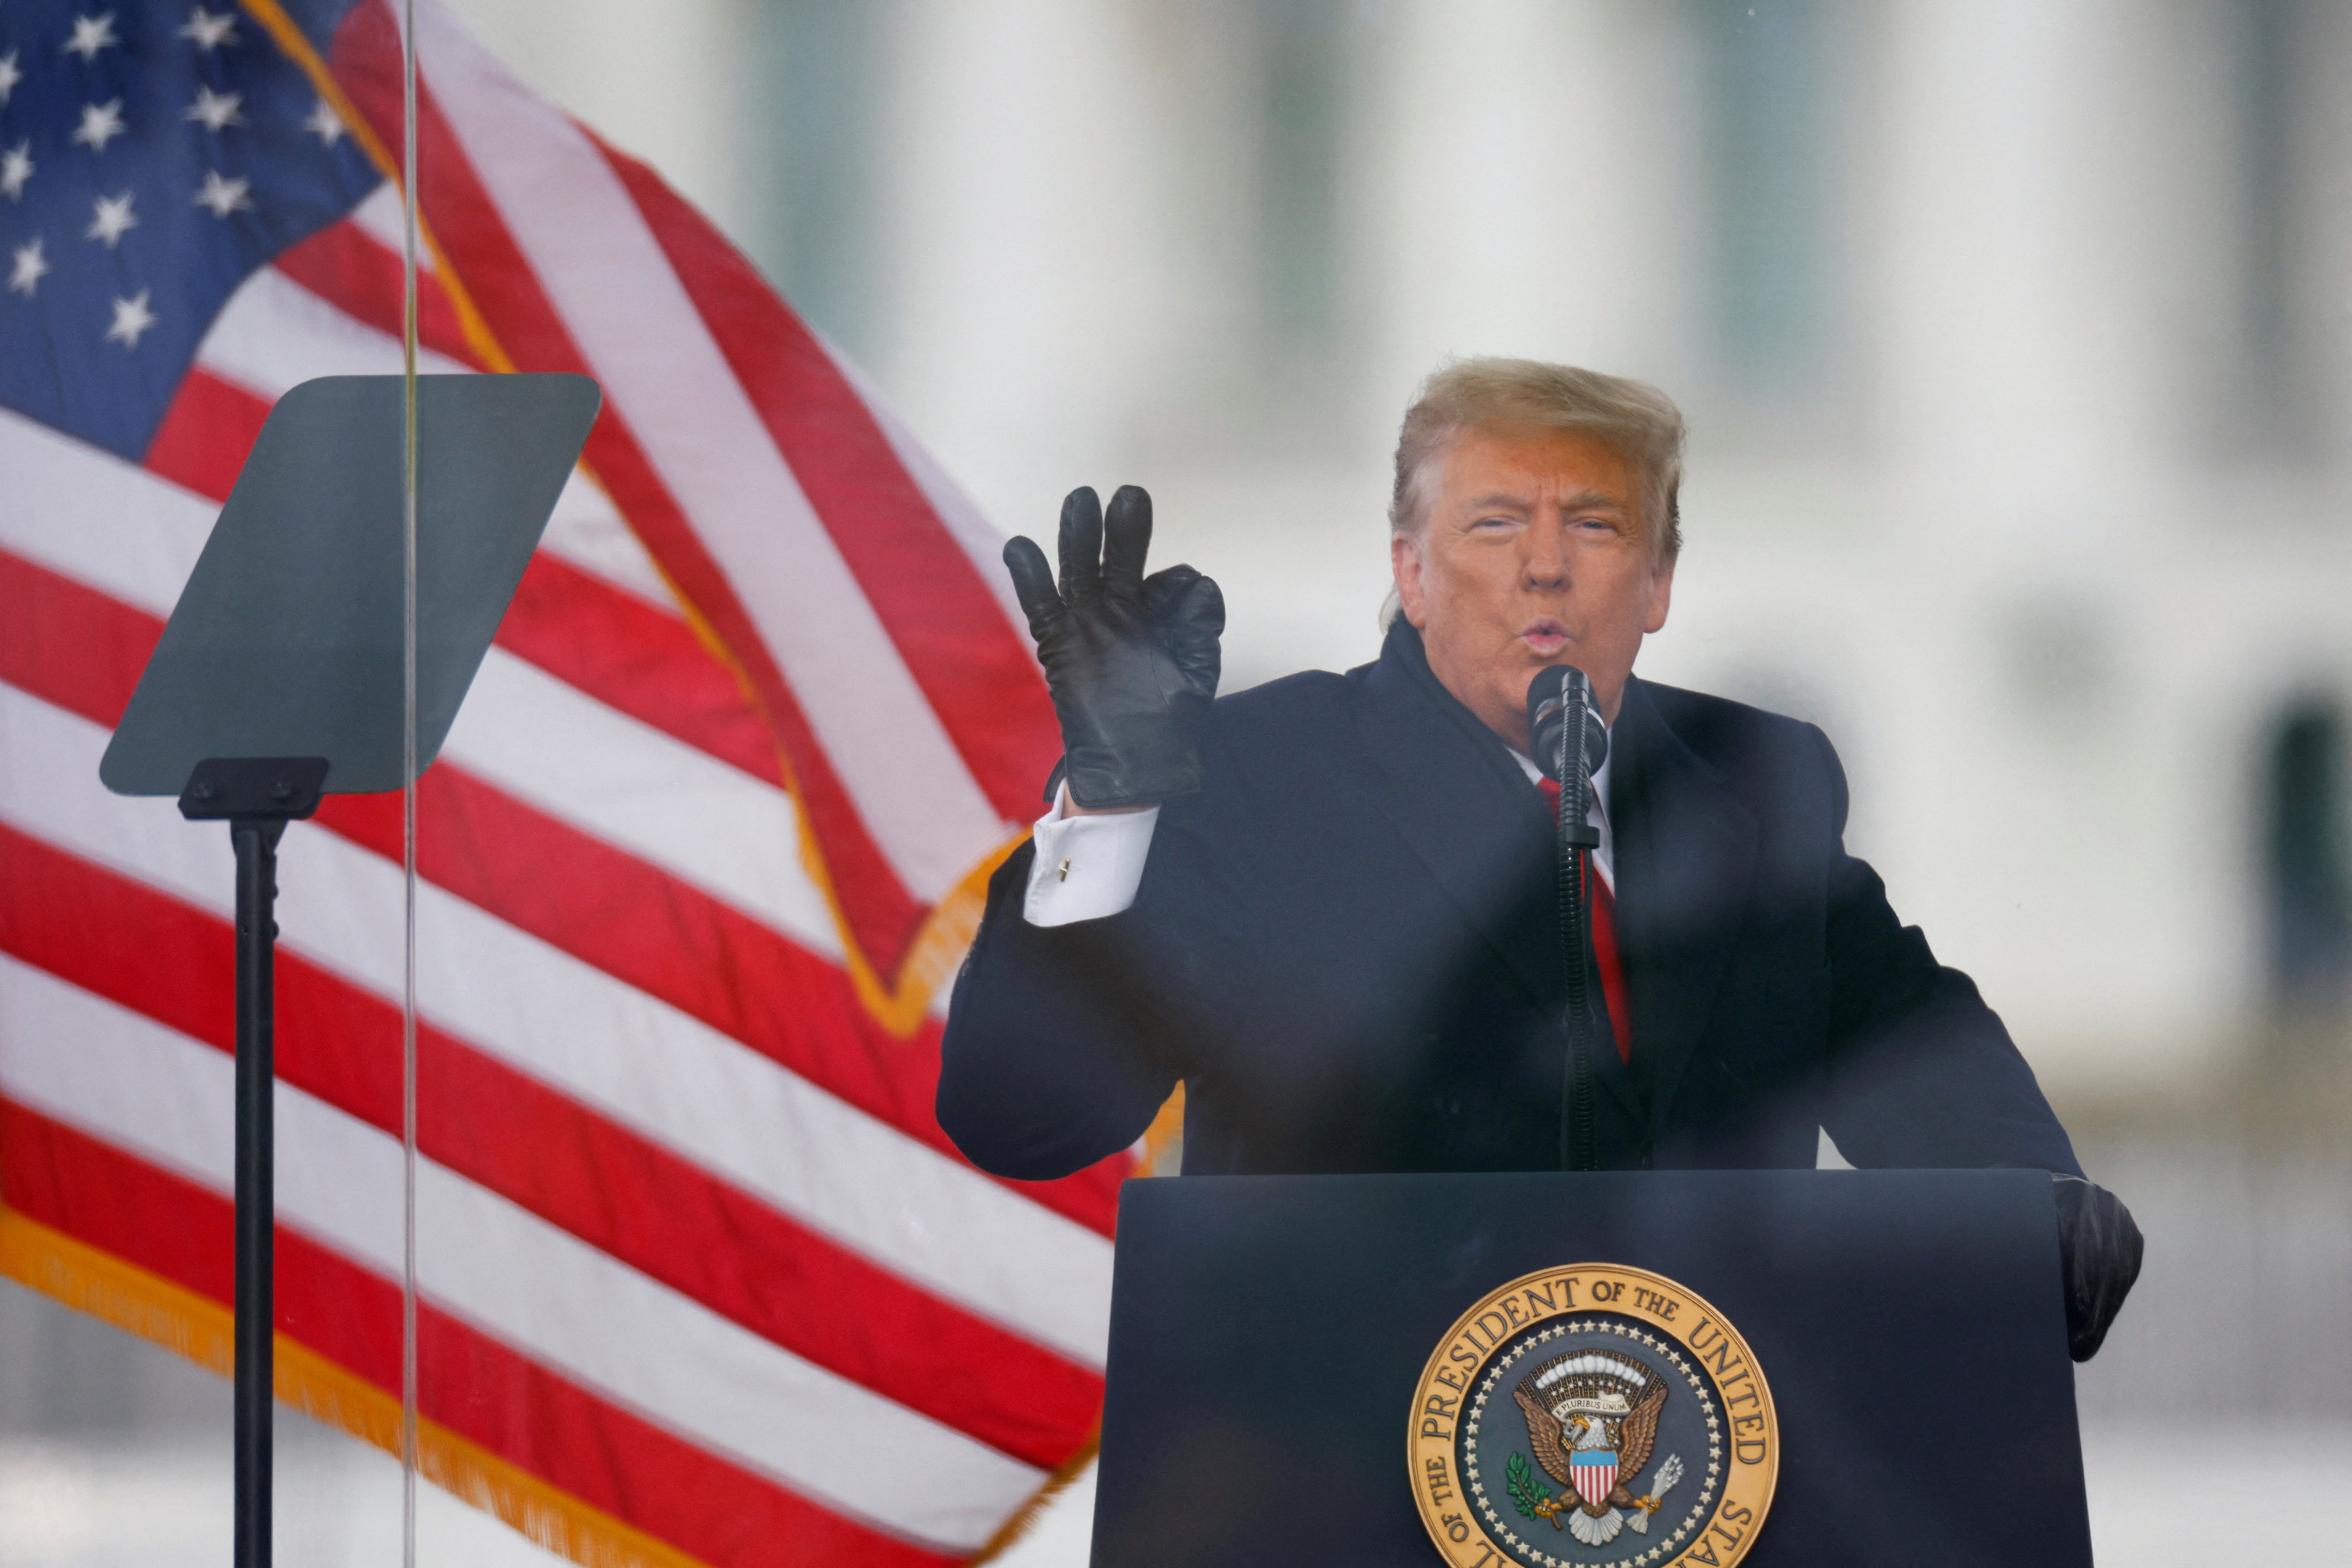 Donald Trump speaks to supporters in Washington DC before a mob stormed the Capitol on January 6, 2021. The Supreme Court on July 1 granted Trump some immunity from prosecution in a criminal election interference case.